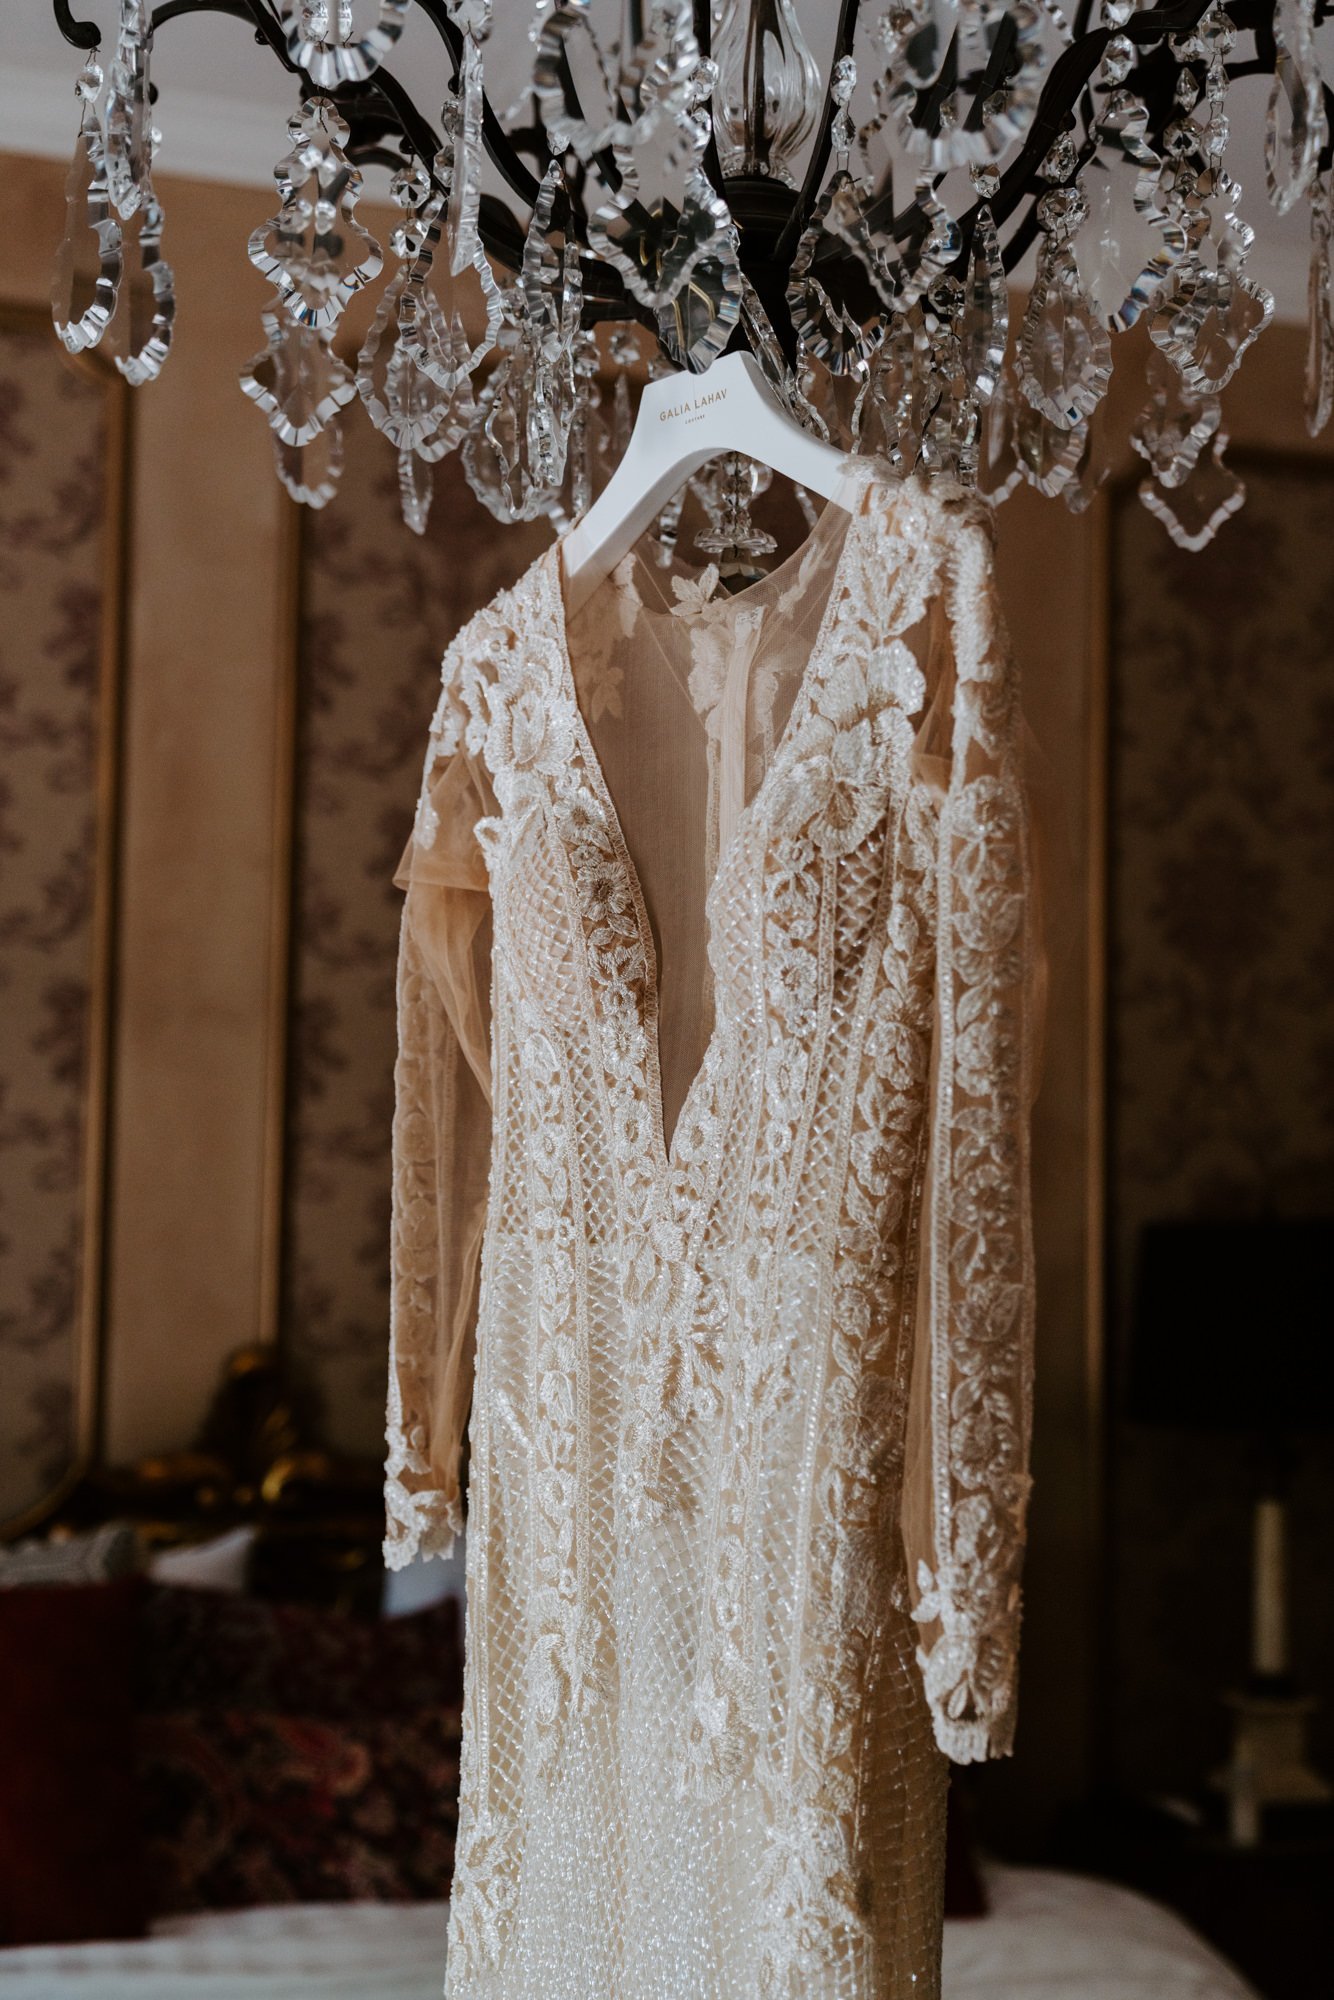 Galia Lahav bridal dress hanging from chandelier at  The Houdini Estate Wedding, Los Angeles Wedding Photography by Tida Svy